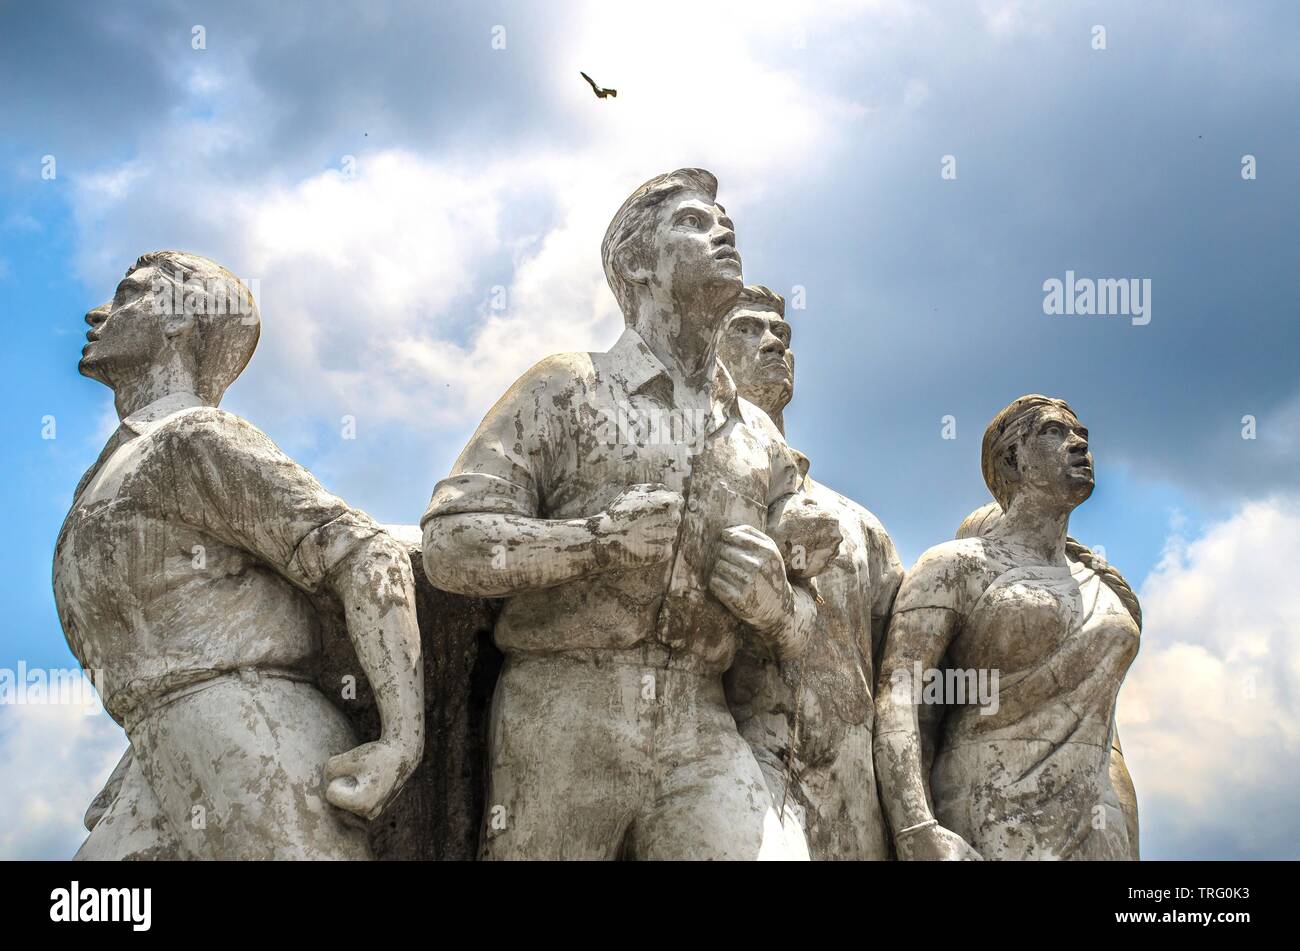 Anti Terrorism Raju Memorial Sculpture, located in Dhaka university which is considered the best sculpture in Bangladesh. This is a very famous sculptur Stock Photo